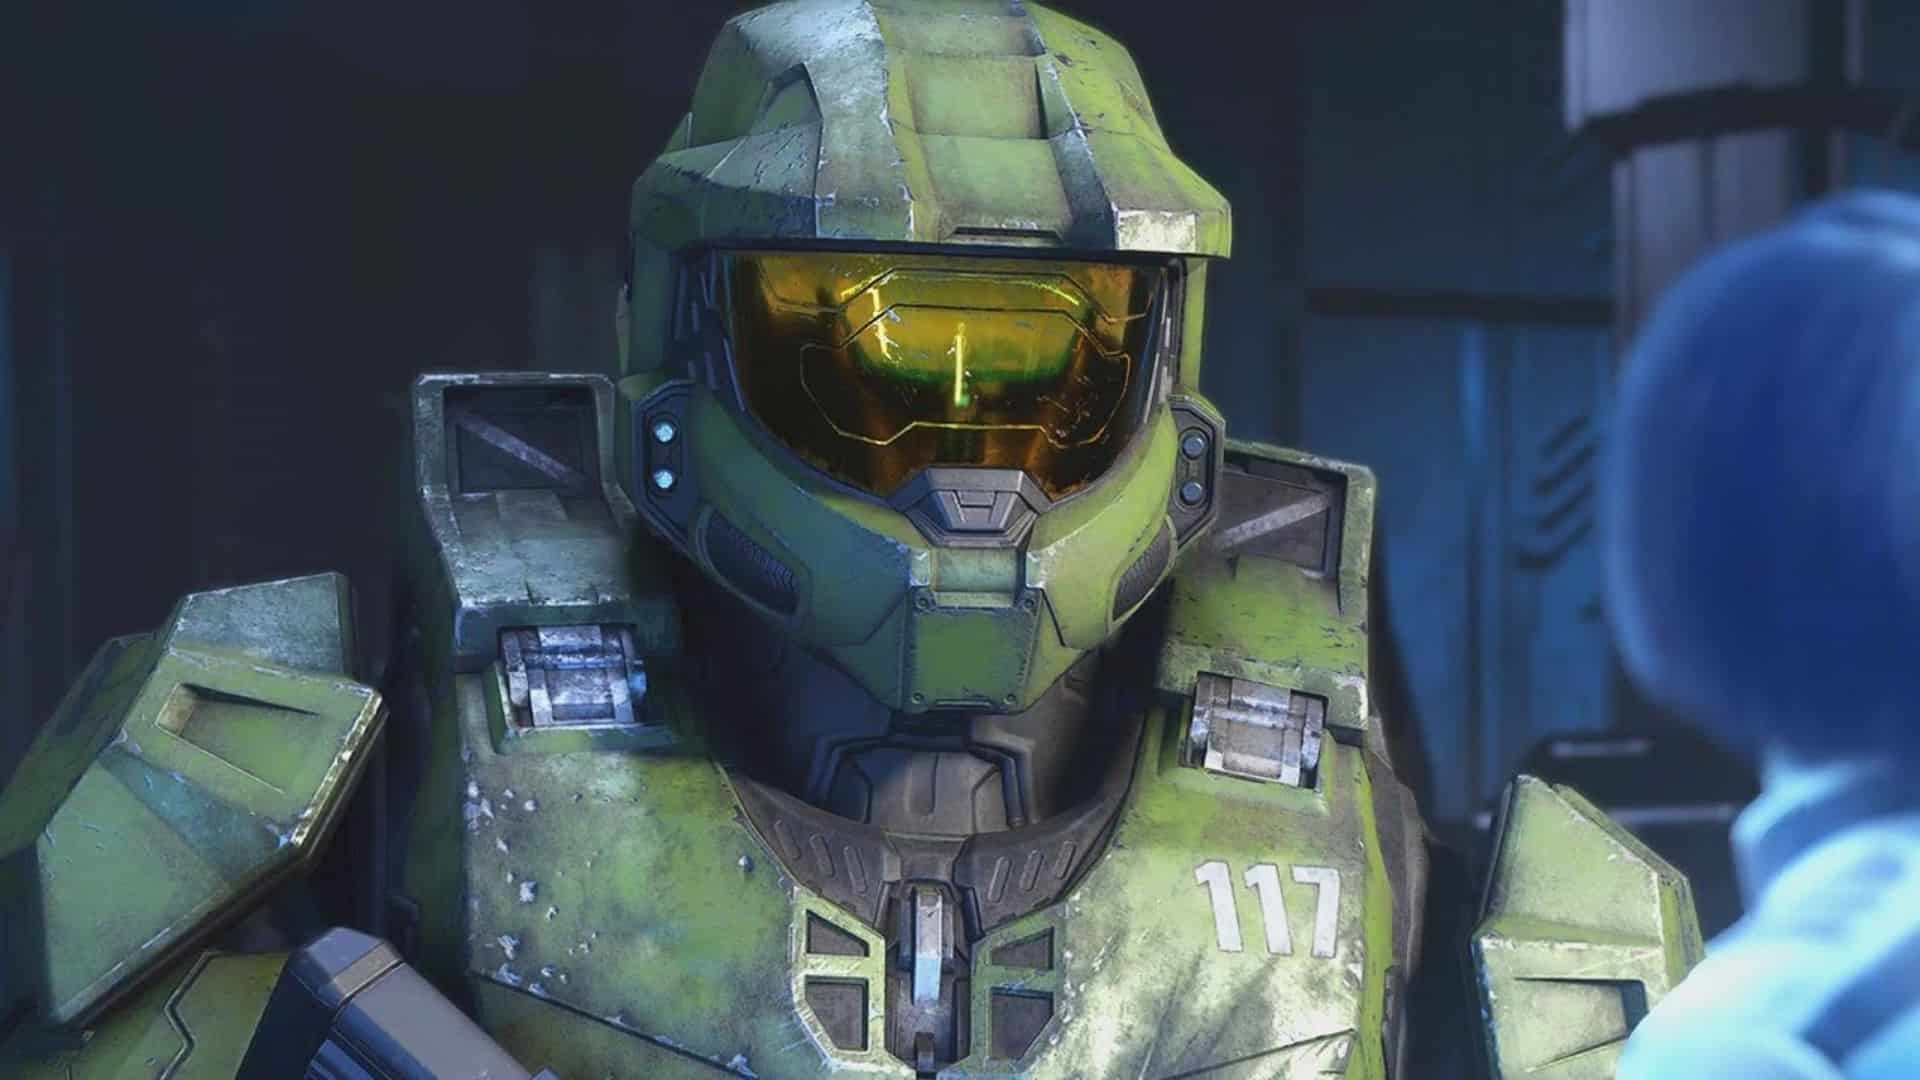 Halo TV series official trailer and release date revealed - Dexerto